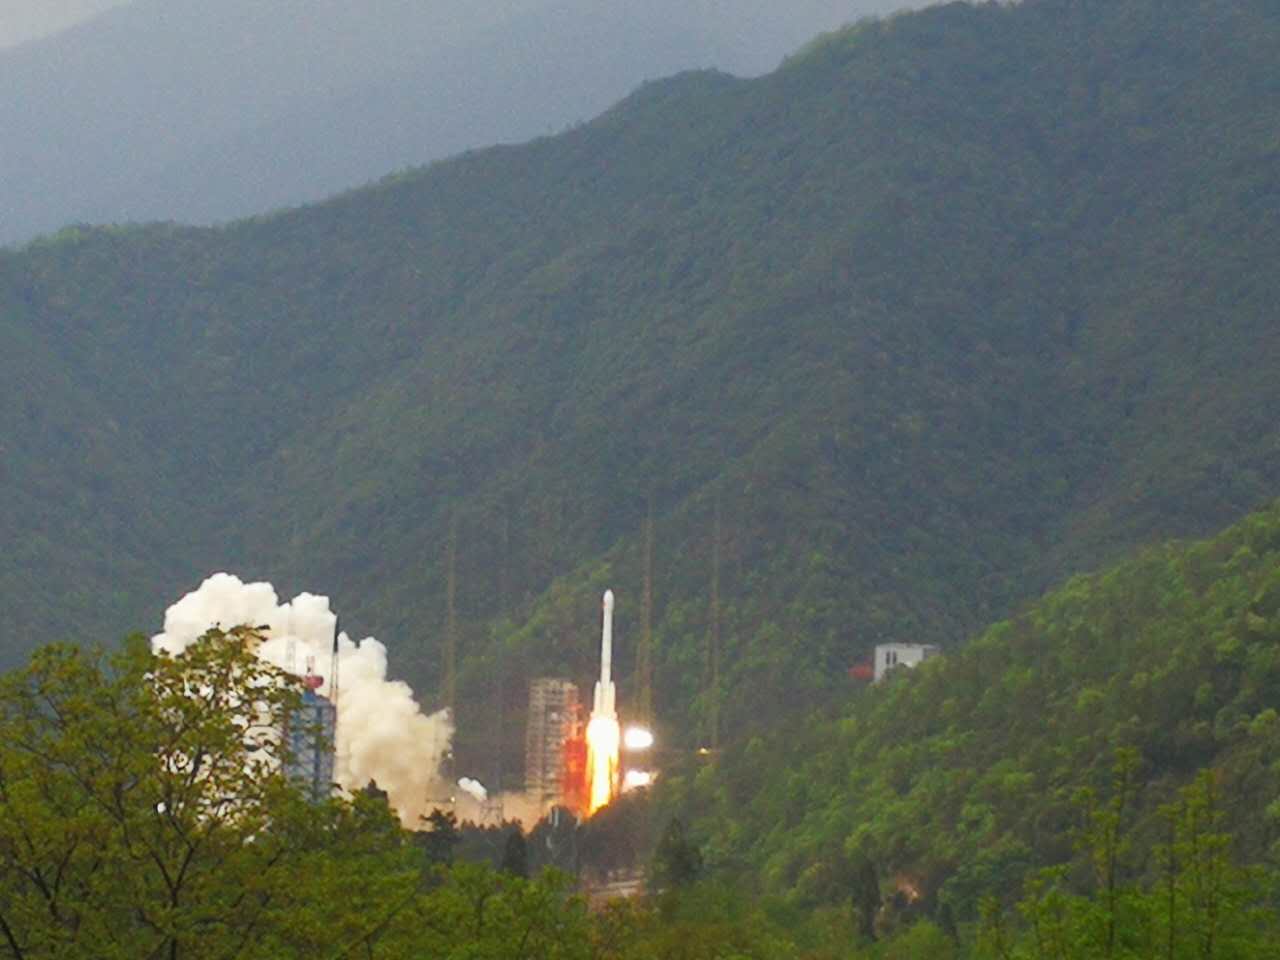 Shijian-13, China's first high-throughput communications satellite, is launched from Xichang Satellite Launch Center in southwest China's Sichuan Province at 7:04 p.m., April 12, 2017. [Photo: China Plus/Liu Yiyao]